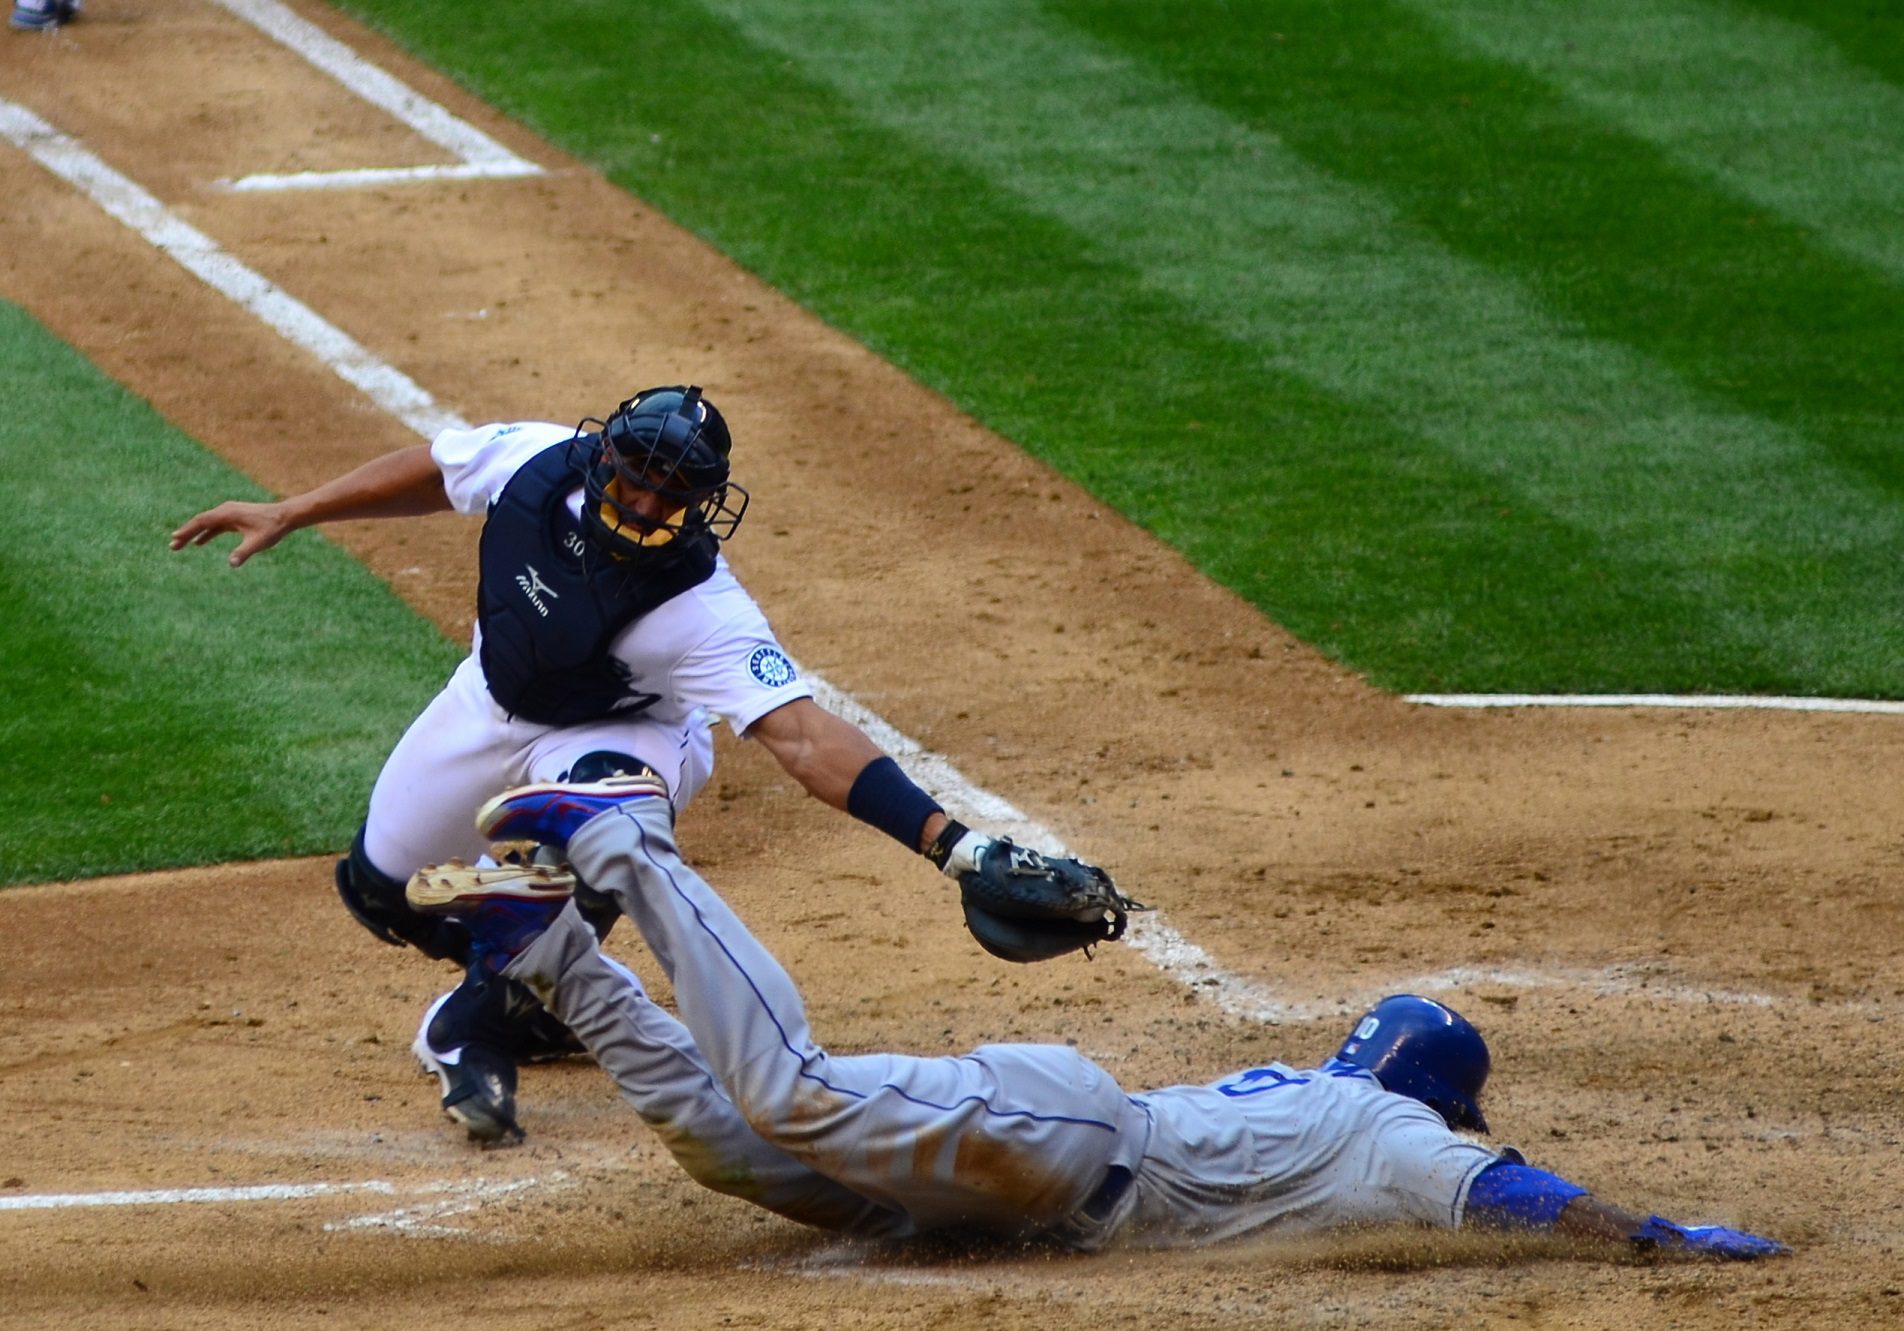 A catcher attempts to tag out a baserunner who is sliding into home plate during a baseball game. Green grass, brown dirt, and white lines are also in the image.